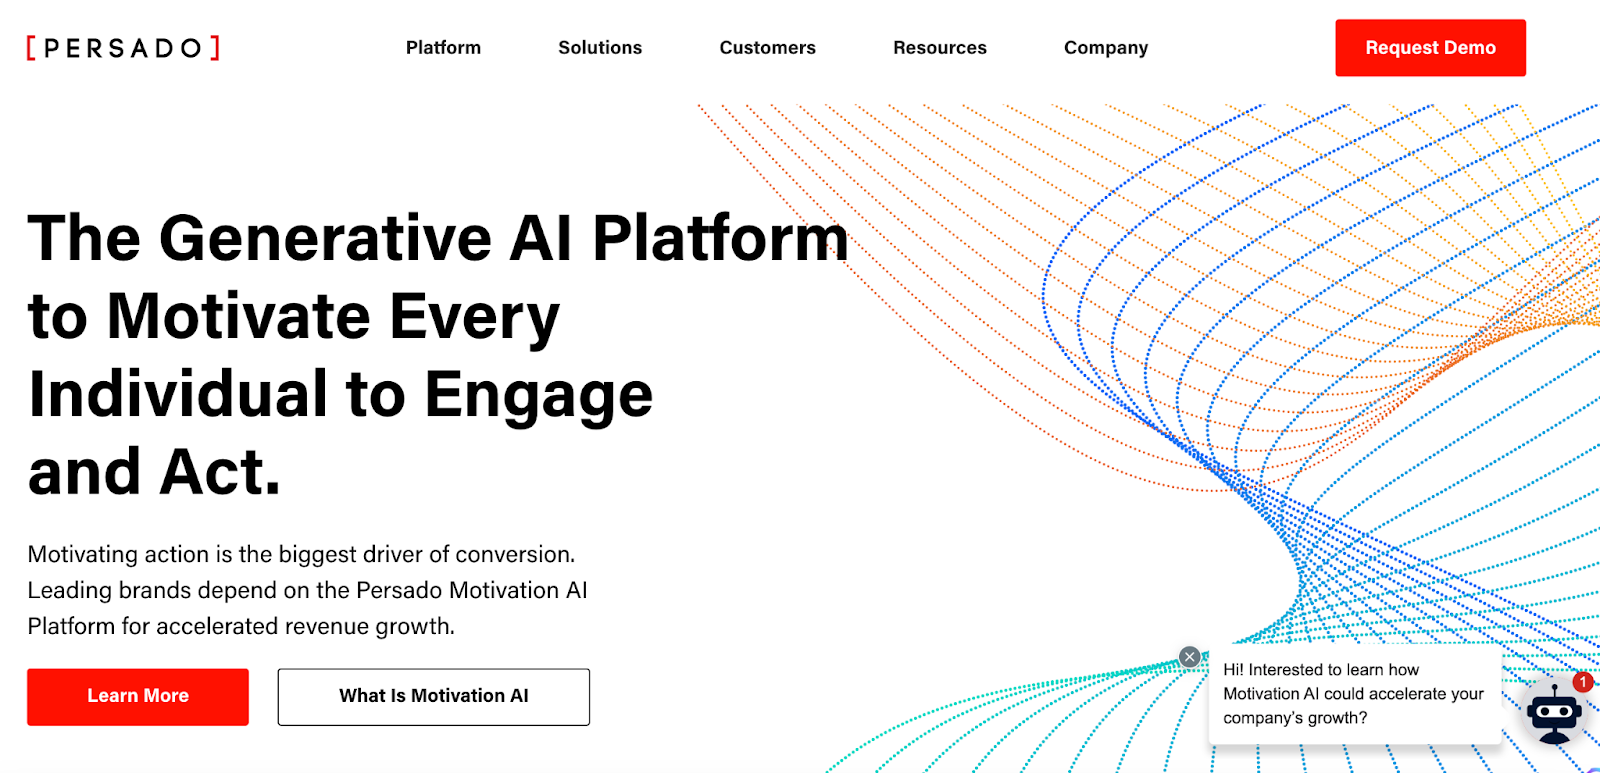 The image displays the main webpage for Persado, stating, “The generative AI platform to motivate every individual to engage and act.” With buttons to sign-up, request a demo, or learn more information.
